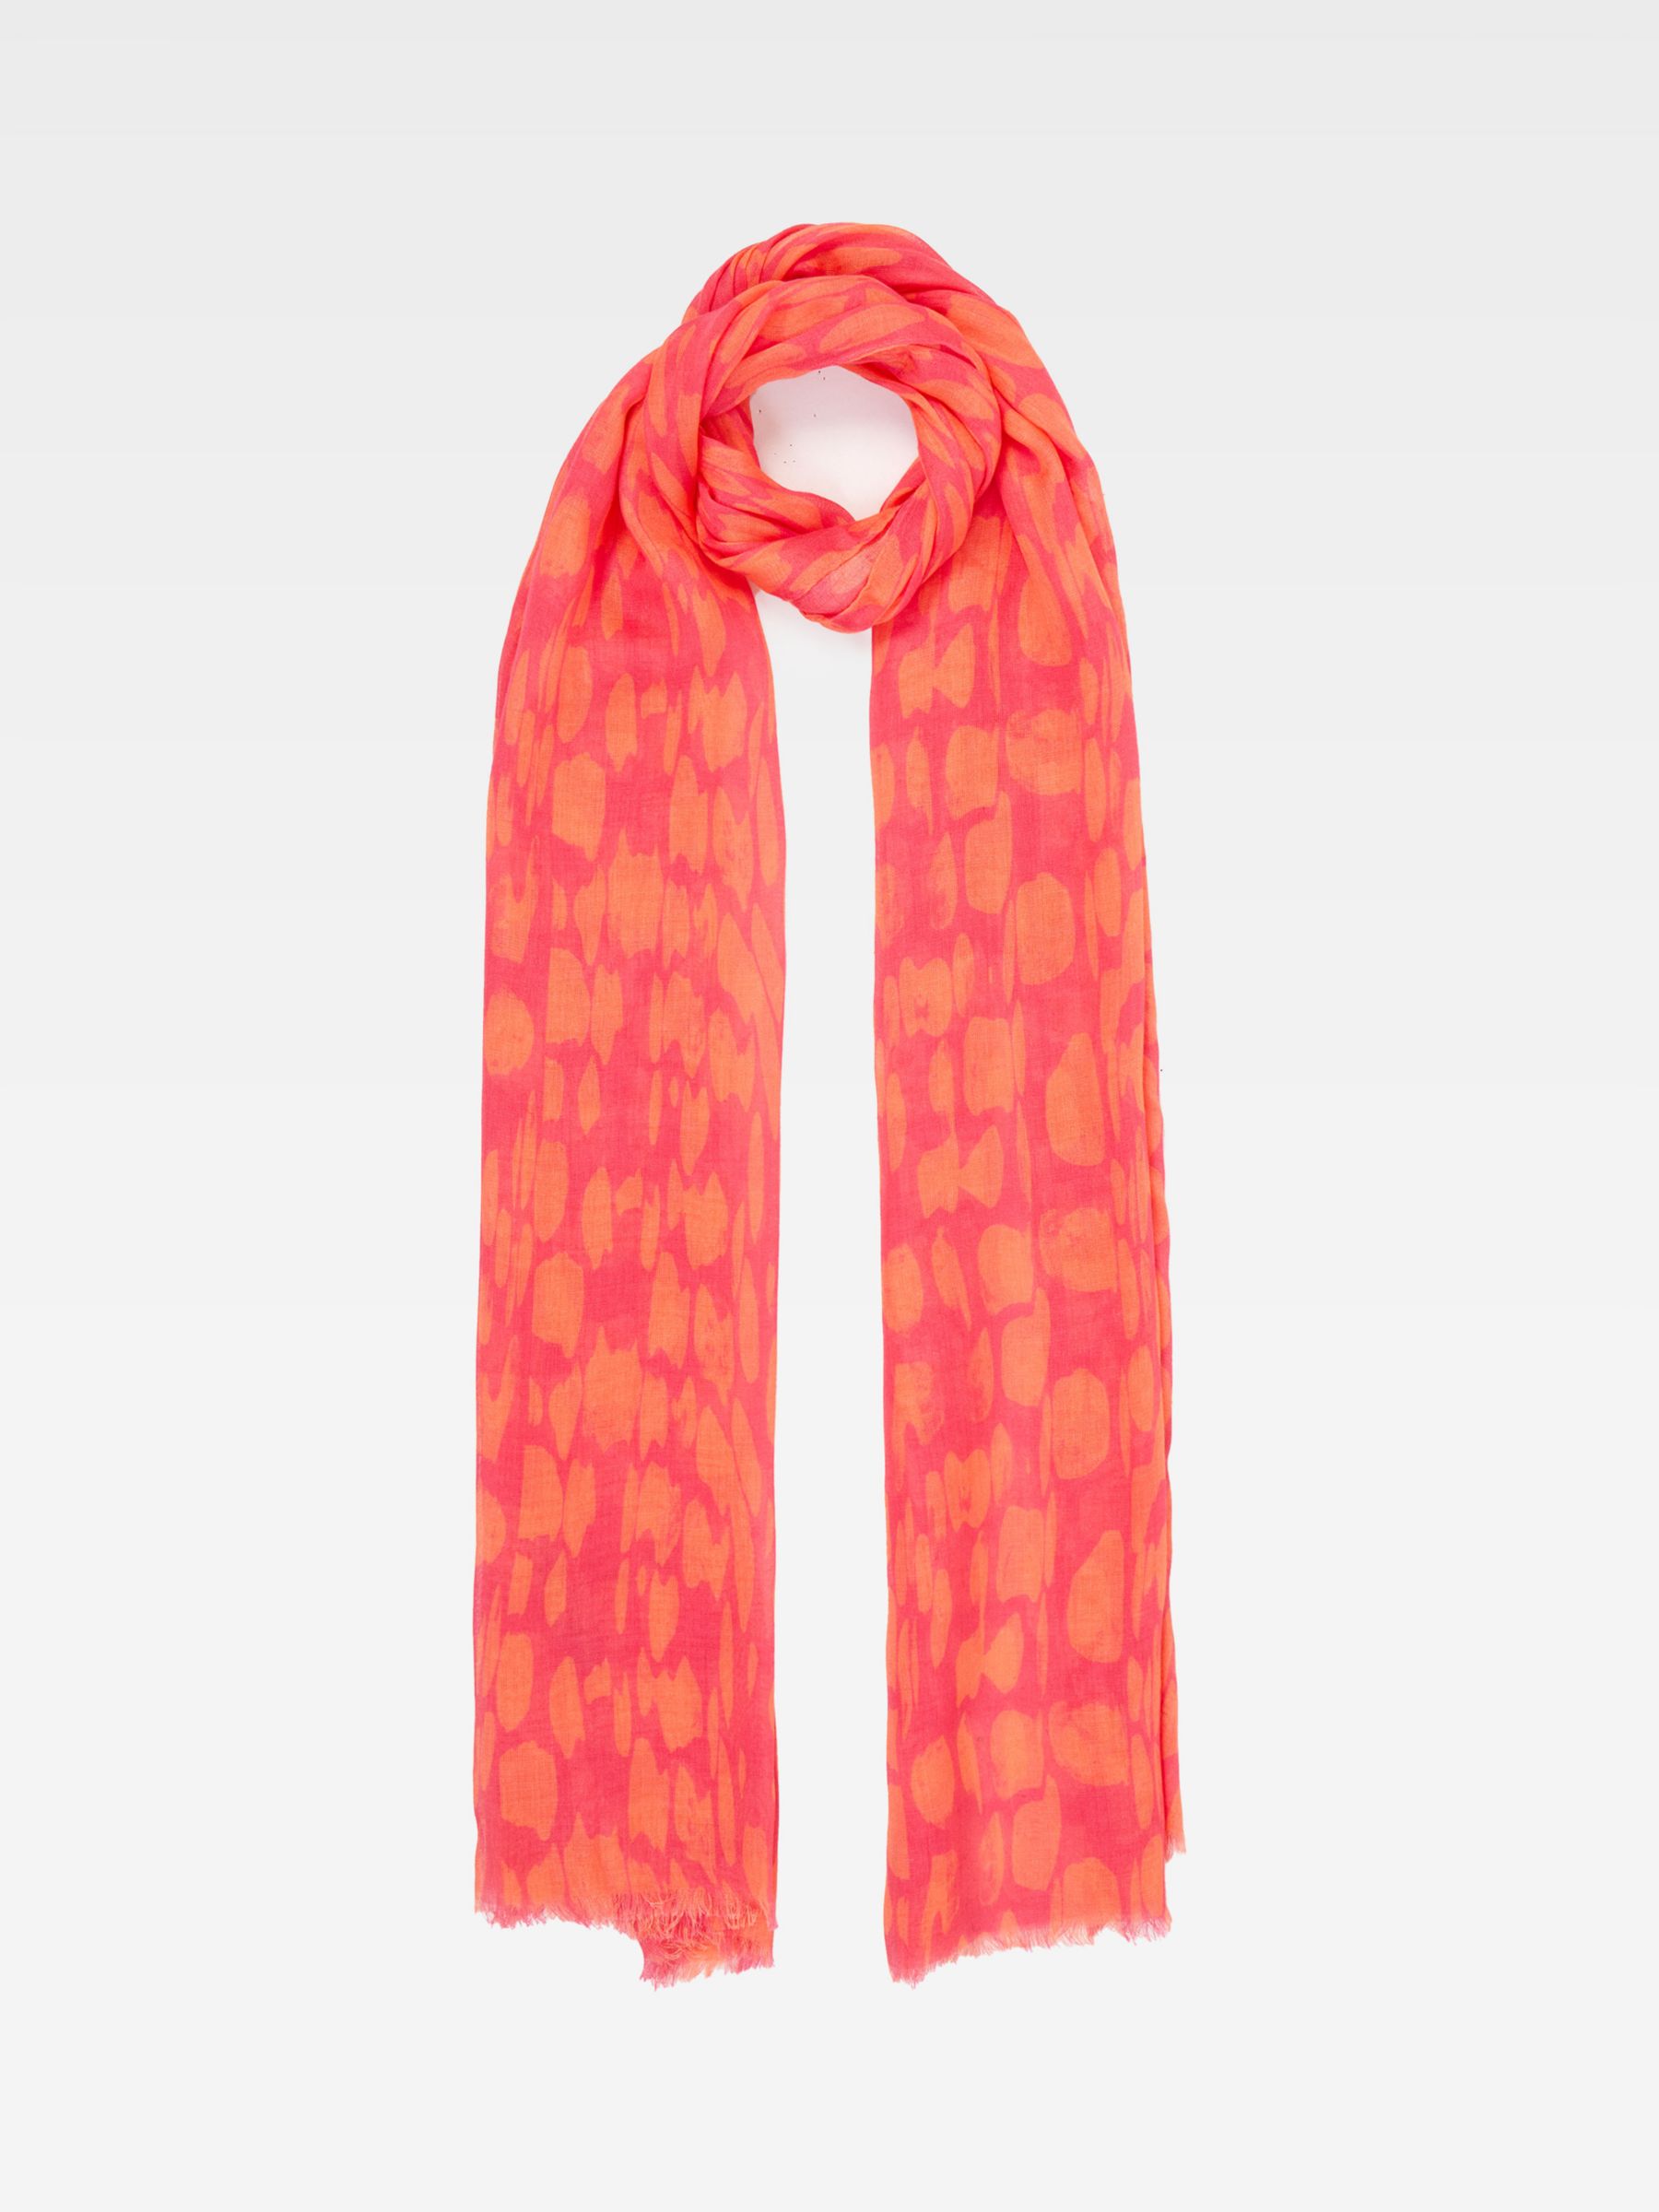 French Connection Splodge Print Modal Scarf, Azalea/Coral, One Size